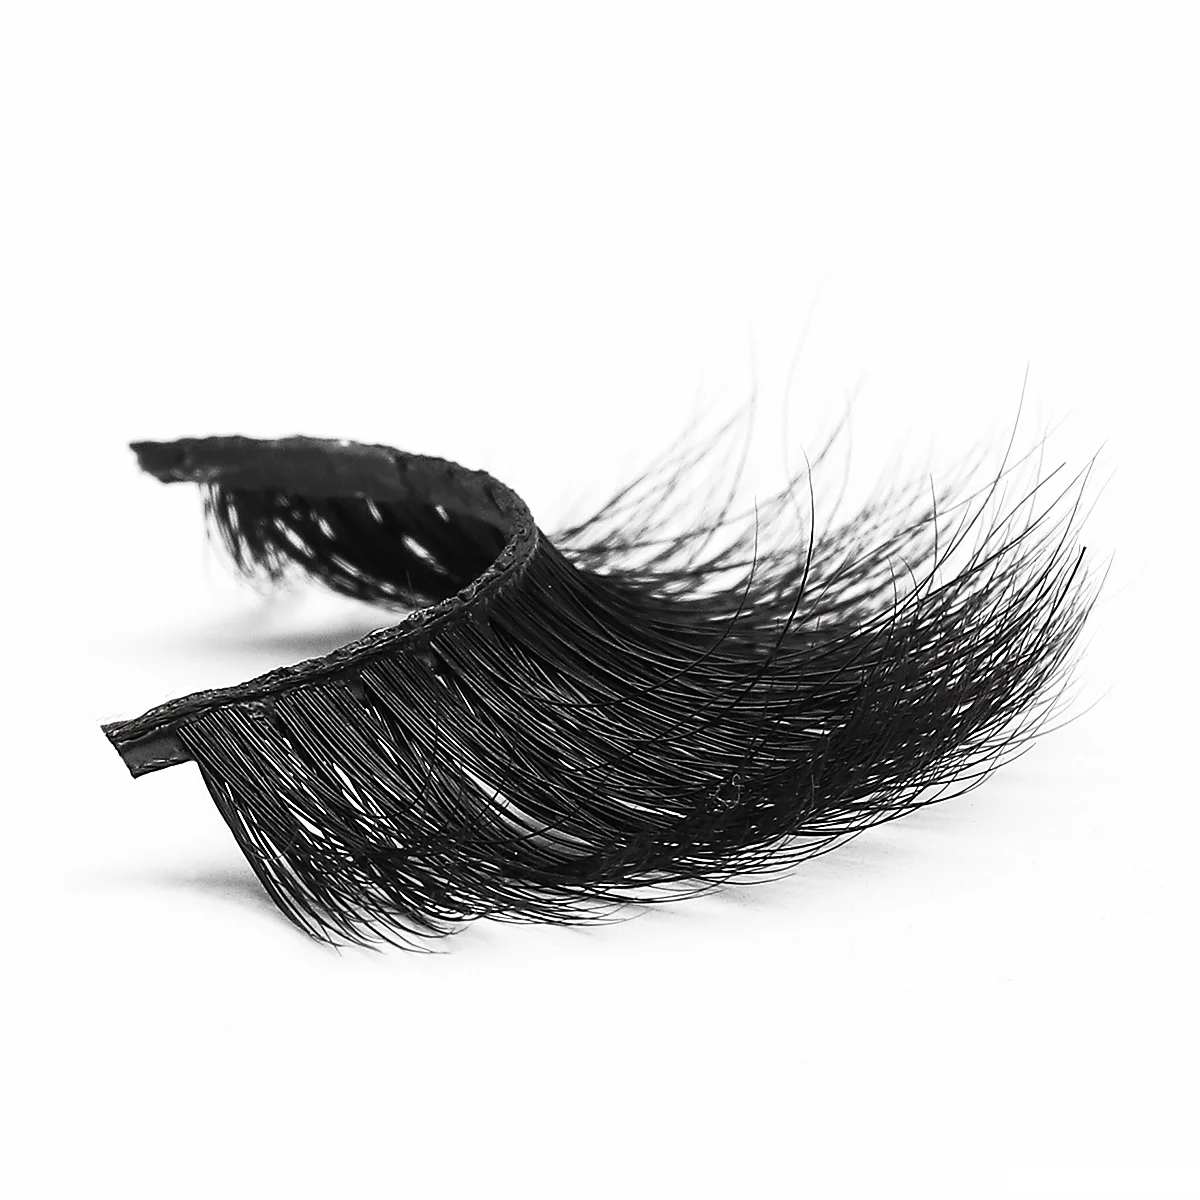 High Quality Own Brand Private Label 100 Real Mink Lashes